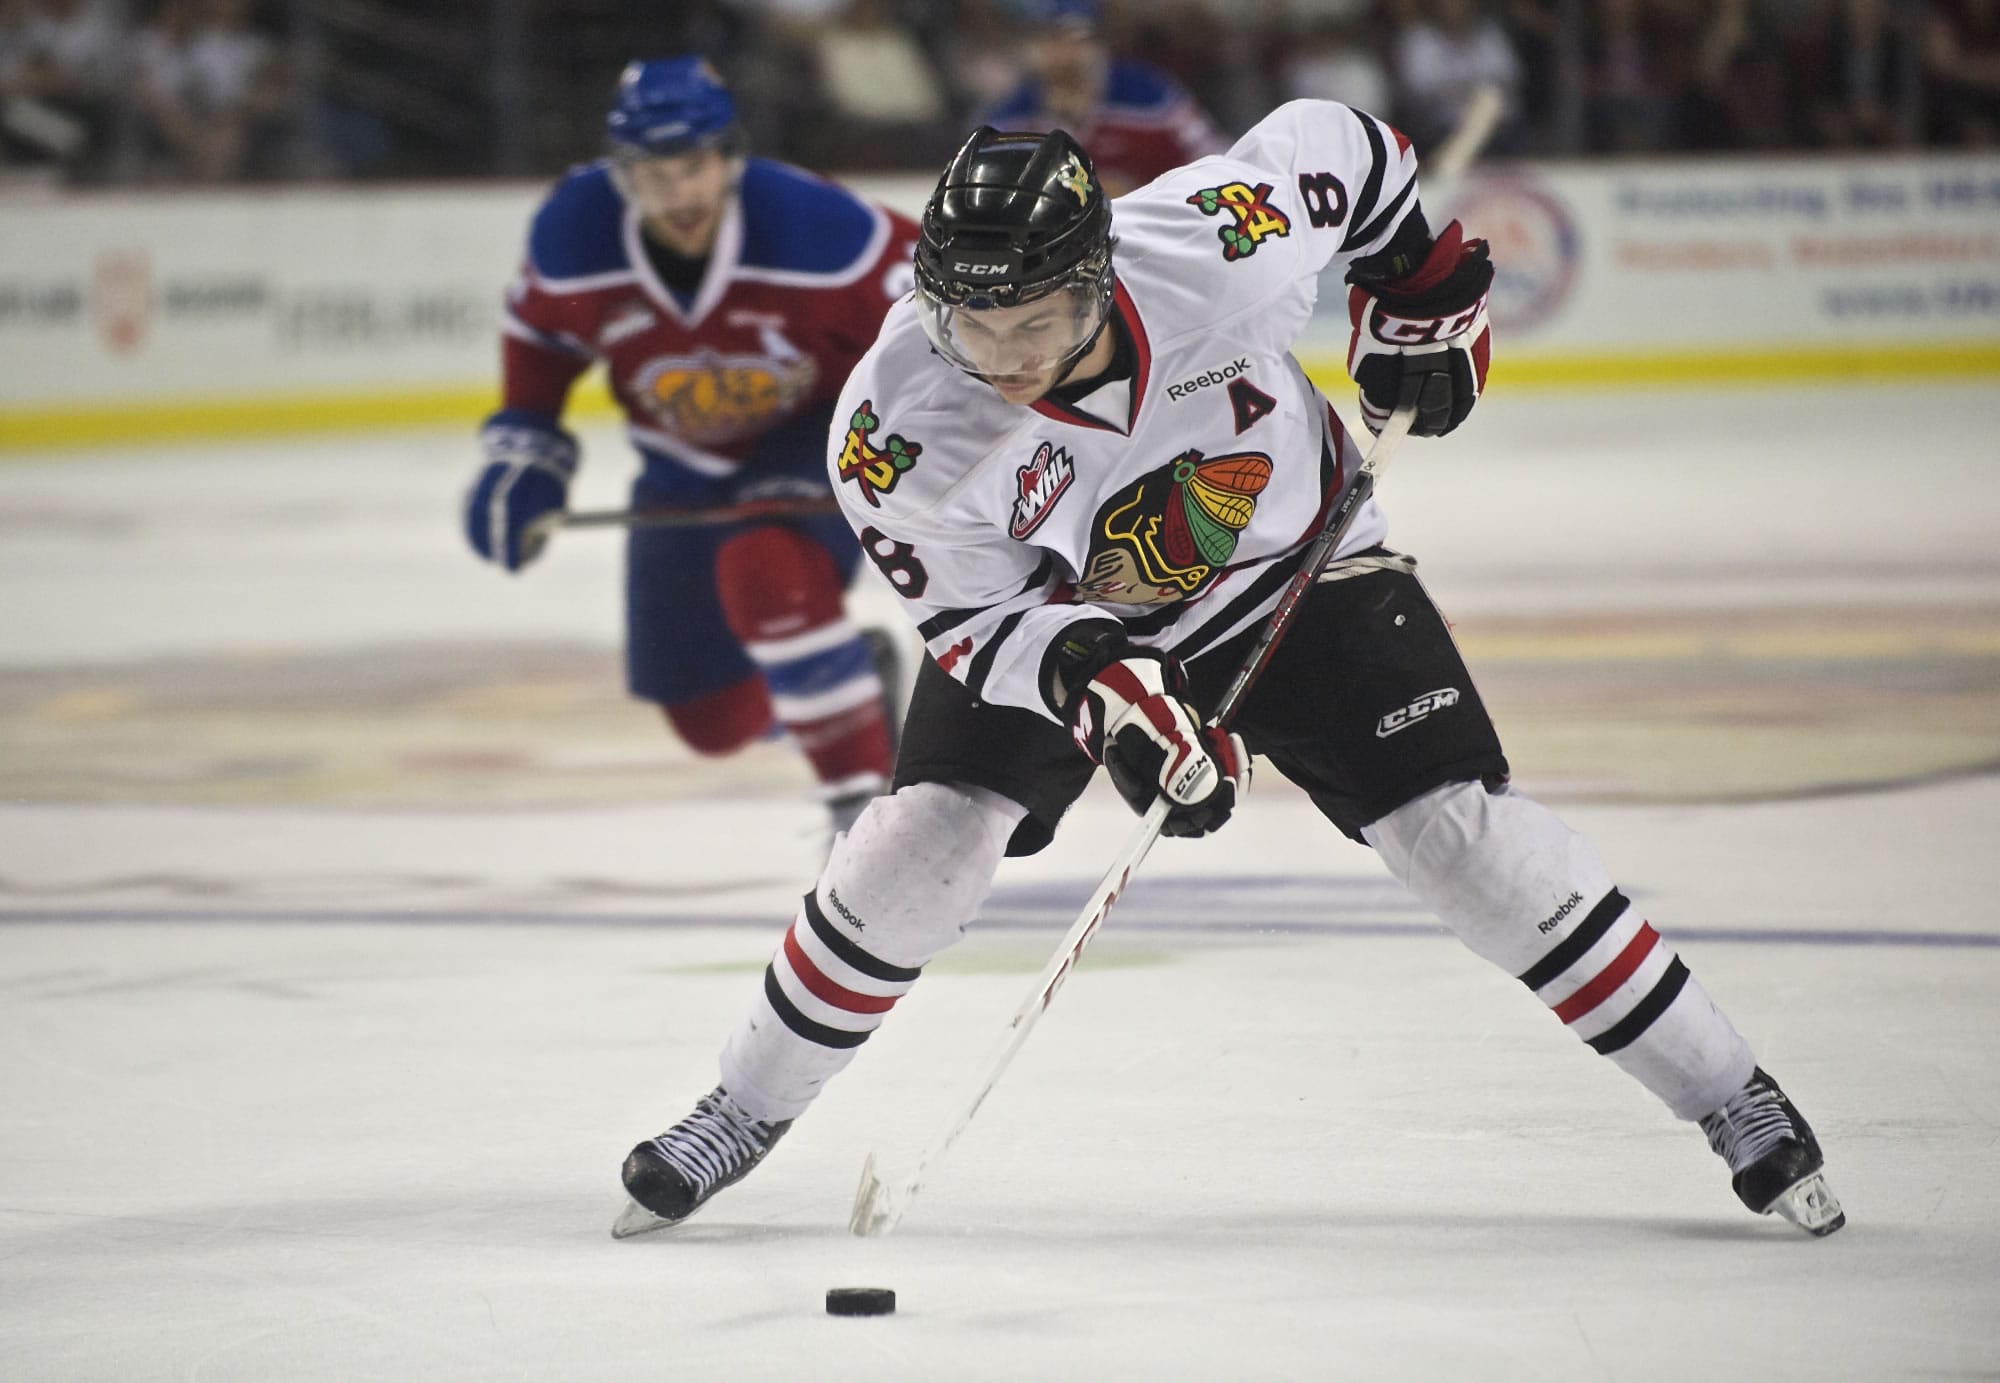 The Winterhawks' Ty Rattie carries the puck into the offensive zone in the second period against the Oil Kings at the Rose Garden. The Winterhawks fell 3-2 in overtime.